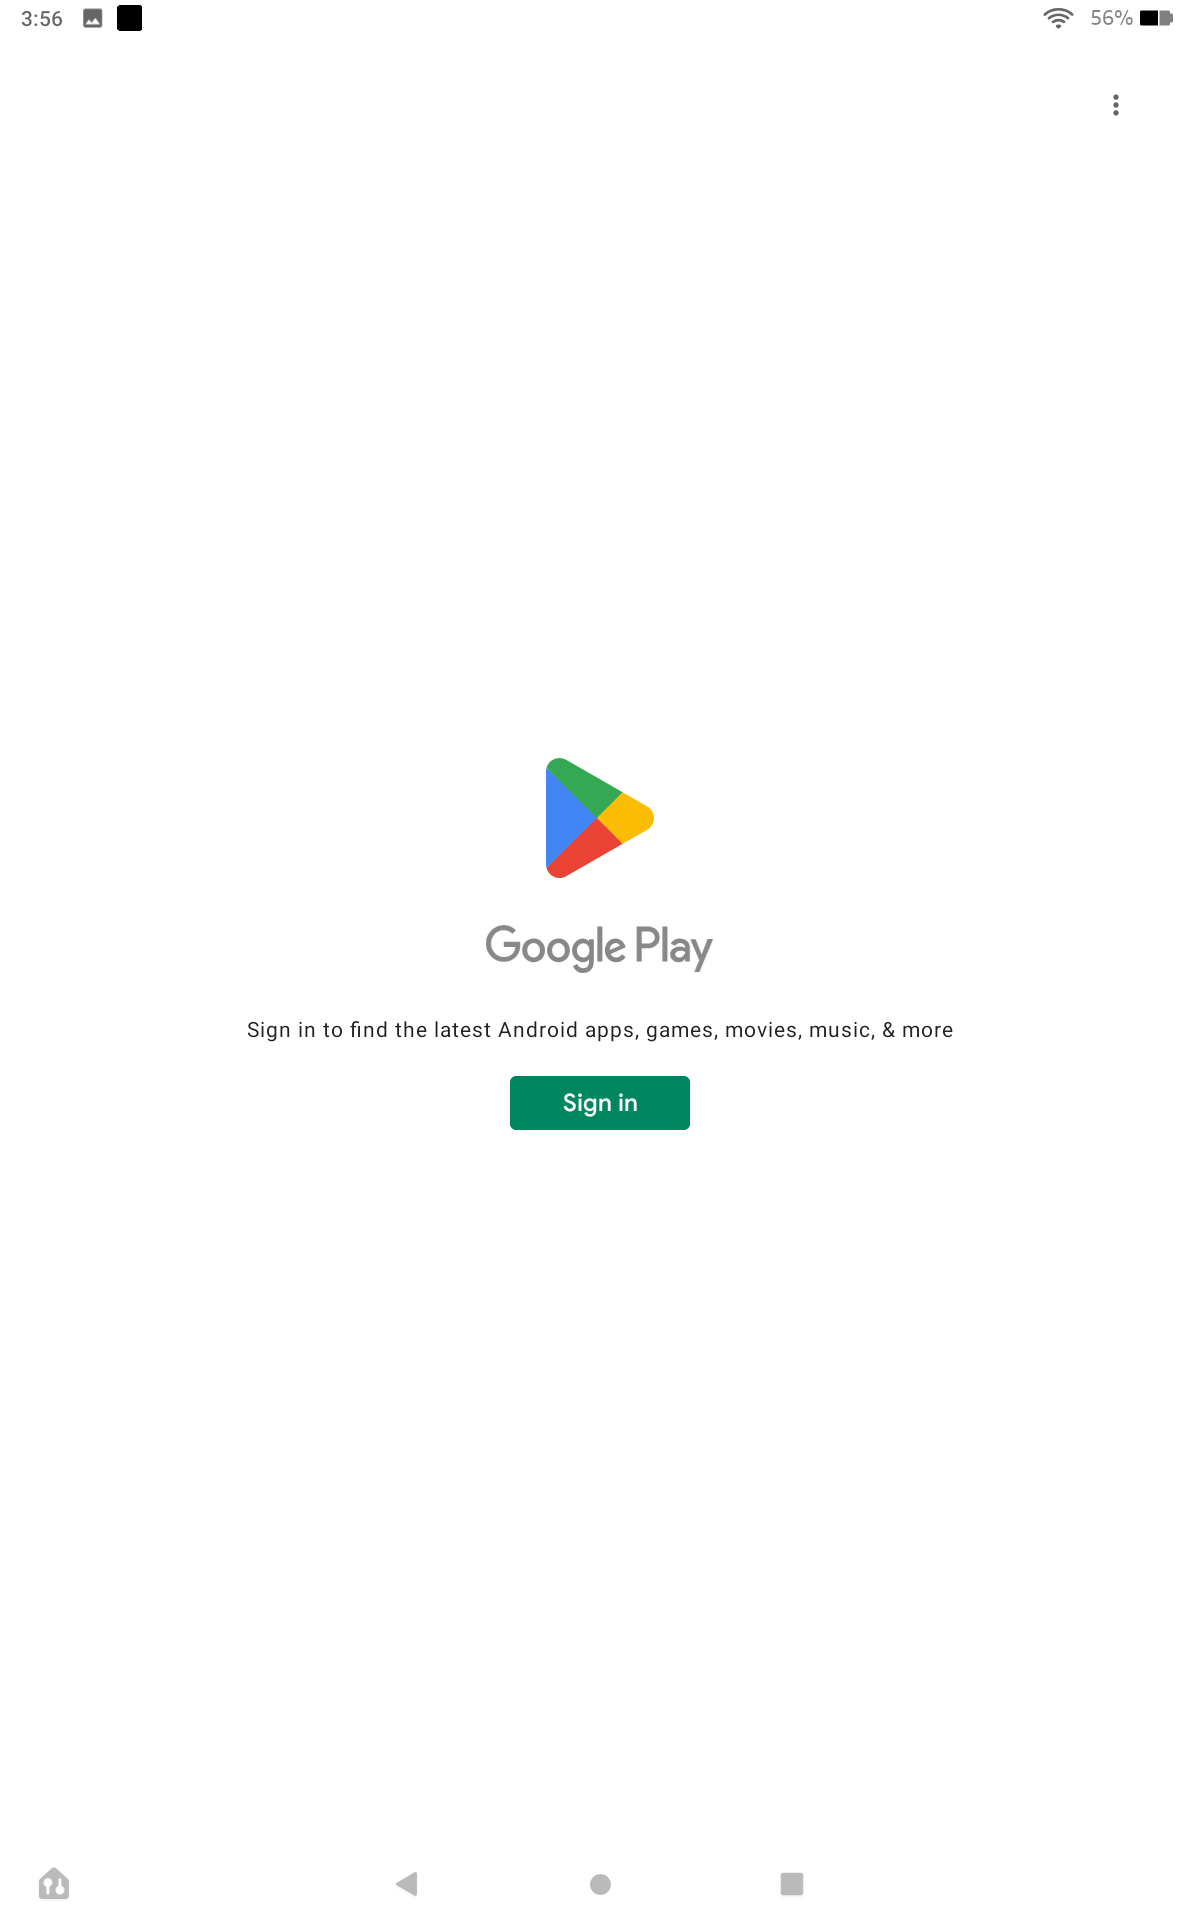 Install Google Play Store on Amazon Fire tablets 2